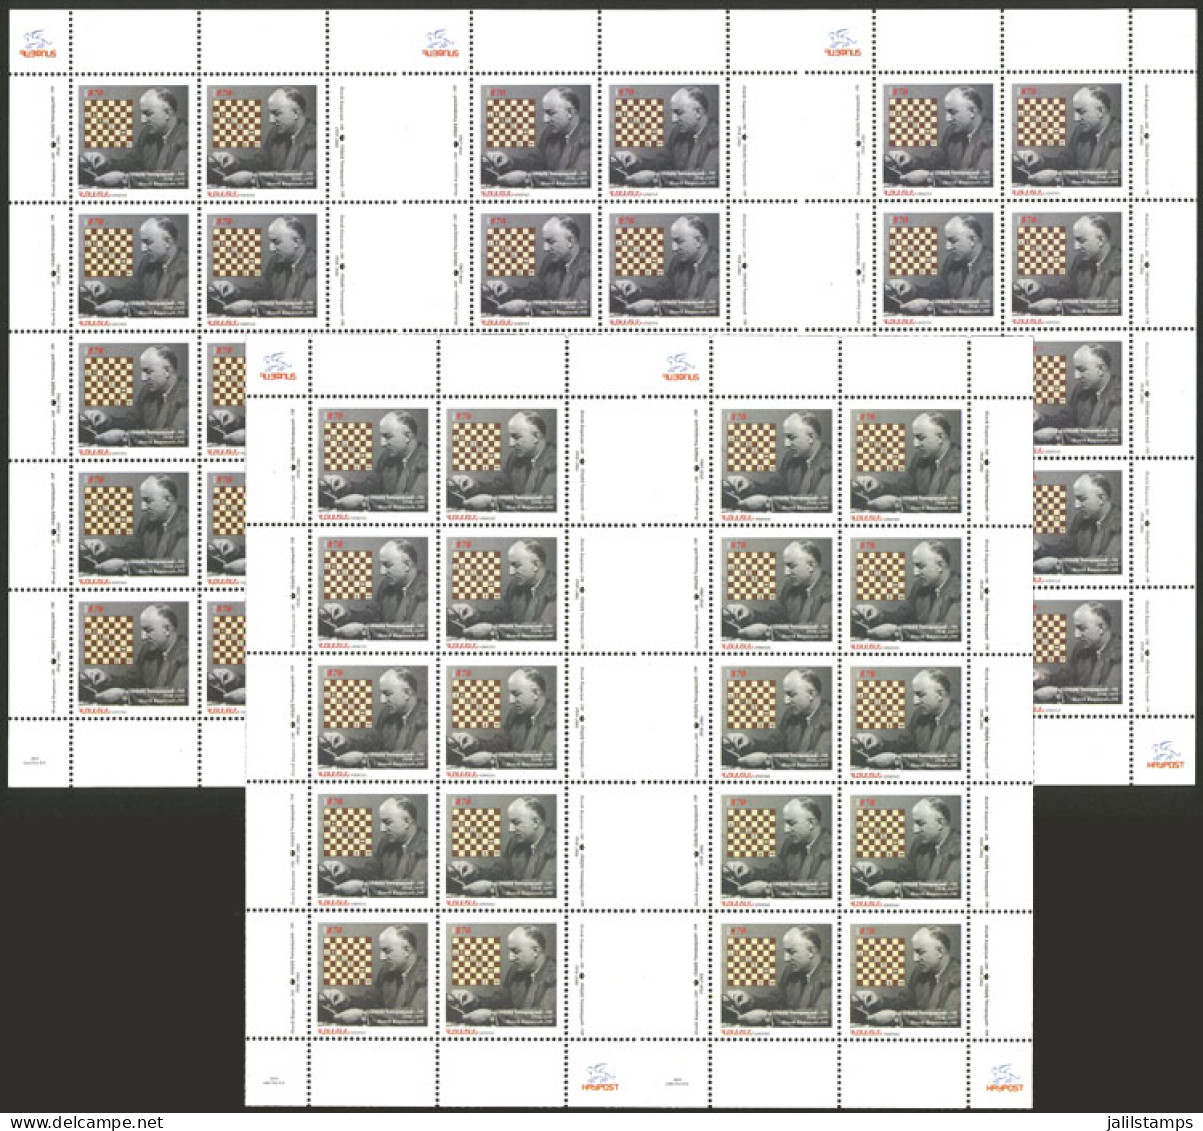 ARMENIA: Sc.839, 2010 Chess (Kasparyan), Block Consisting Of 2 Sheets Of 10 Stamps Each + Gutter, And Another One With 3 - Armenia